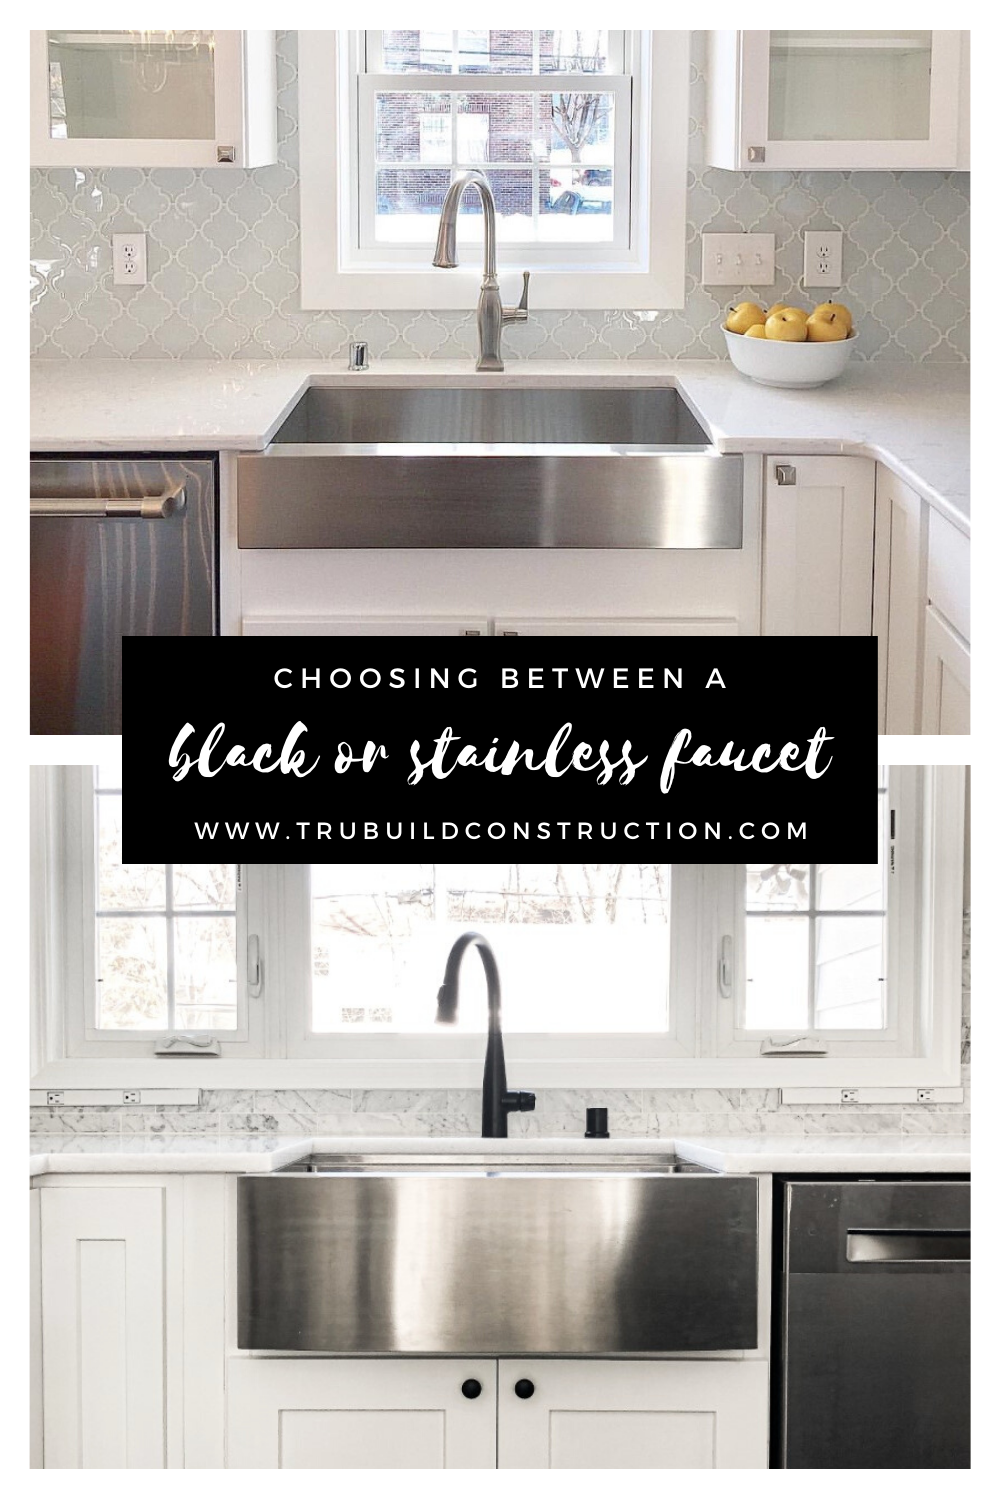 How To Decide Between Black Or Stainless For Your Faucet